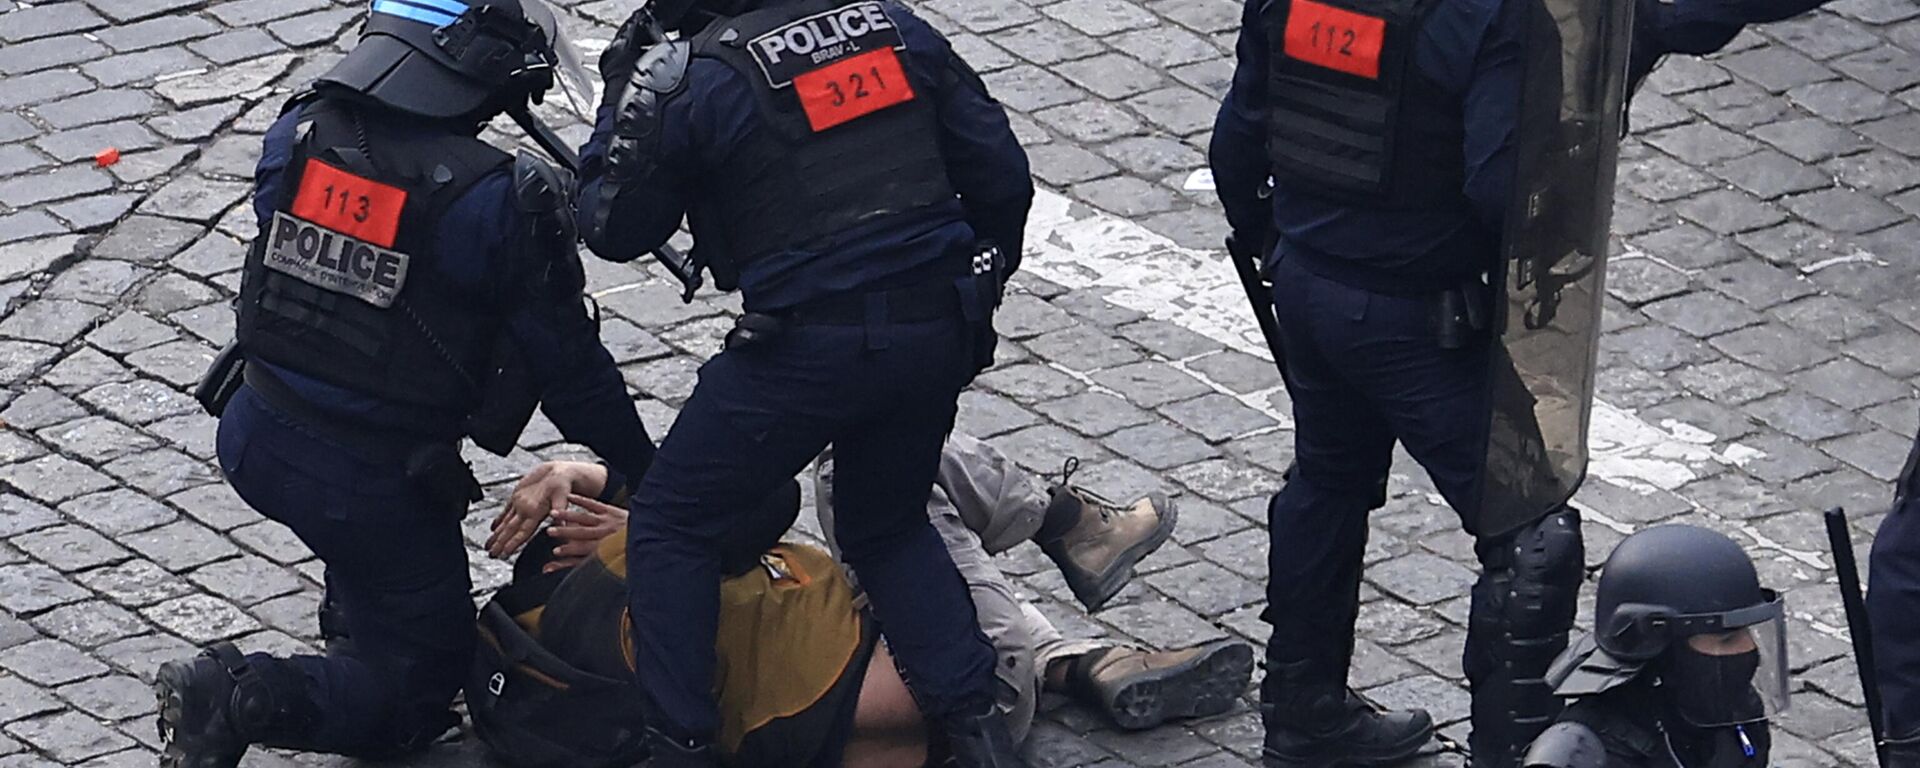 A protester is detained by riot police officers during a demonstration, Tuesday, March 7, 2023 in Paris. - Sputnik International, 1920, 11.03.2023